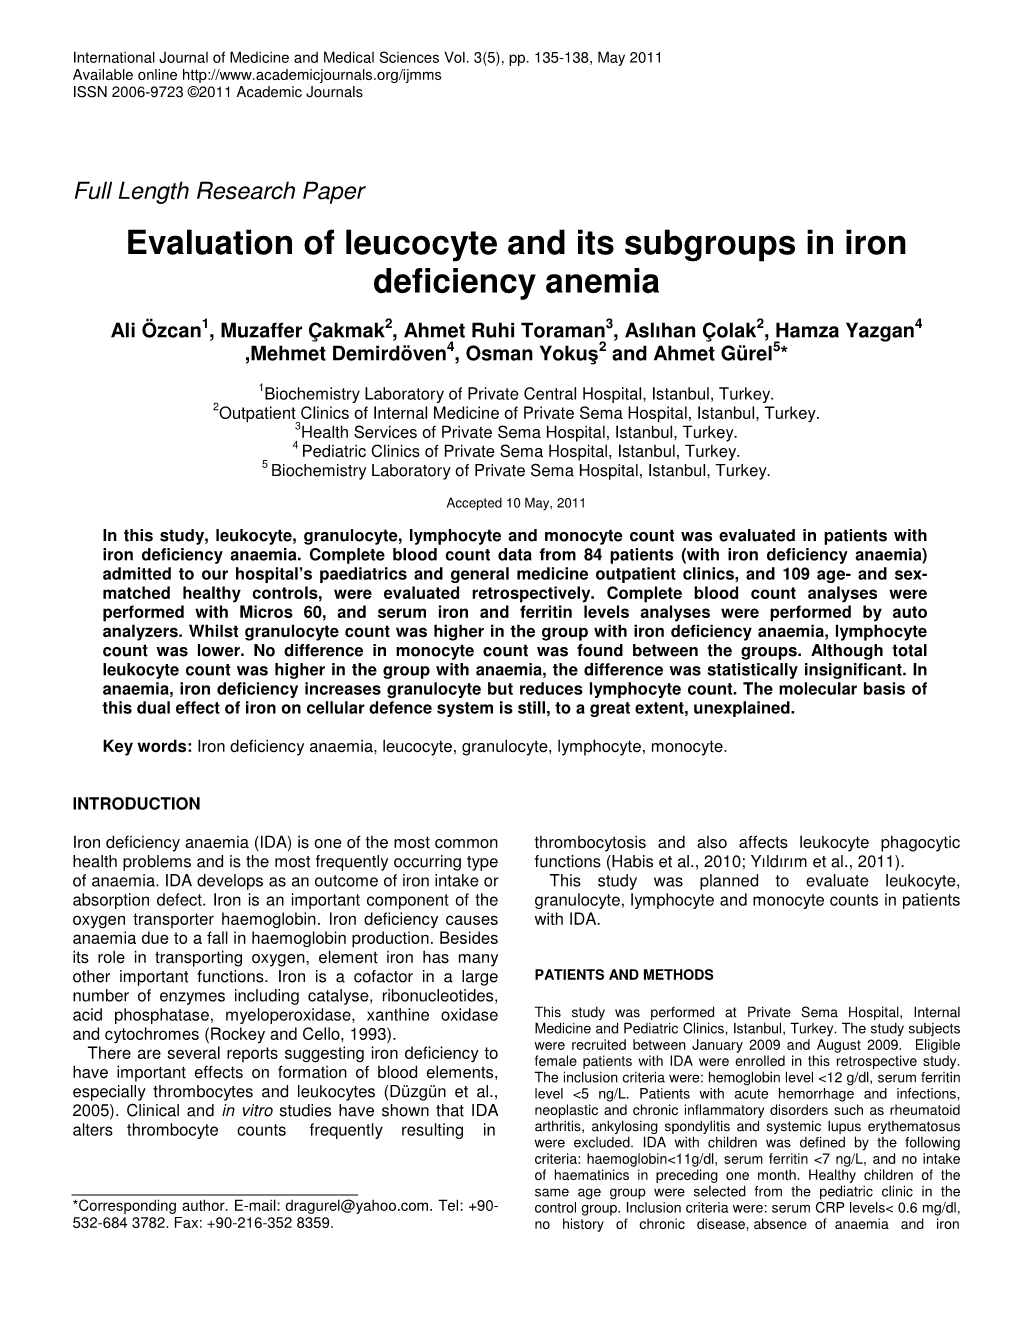 Evaluation of Leucocyte and Its Subgroups in Iron Deficiency Anemia